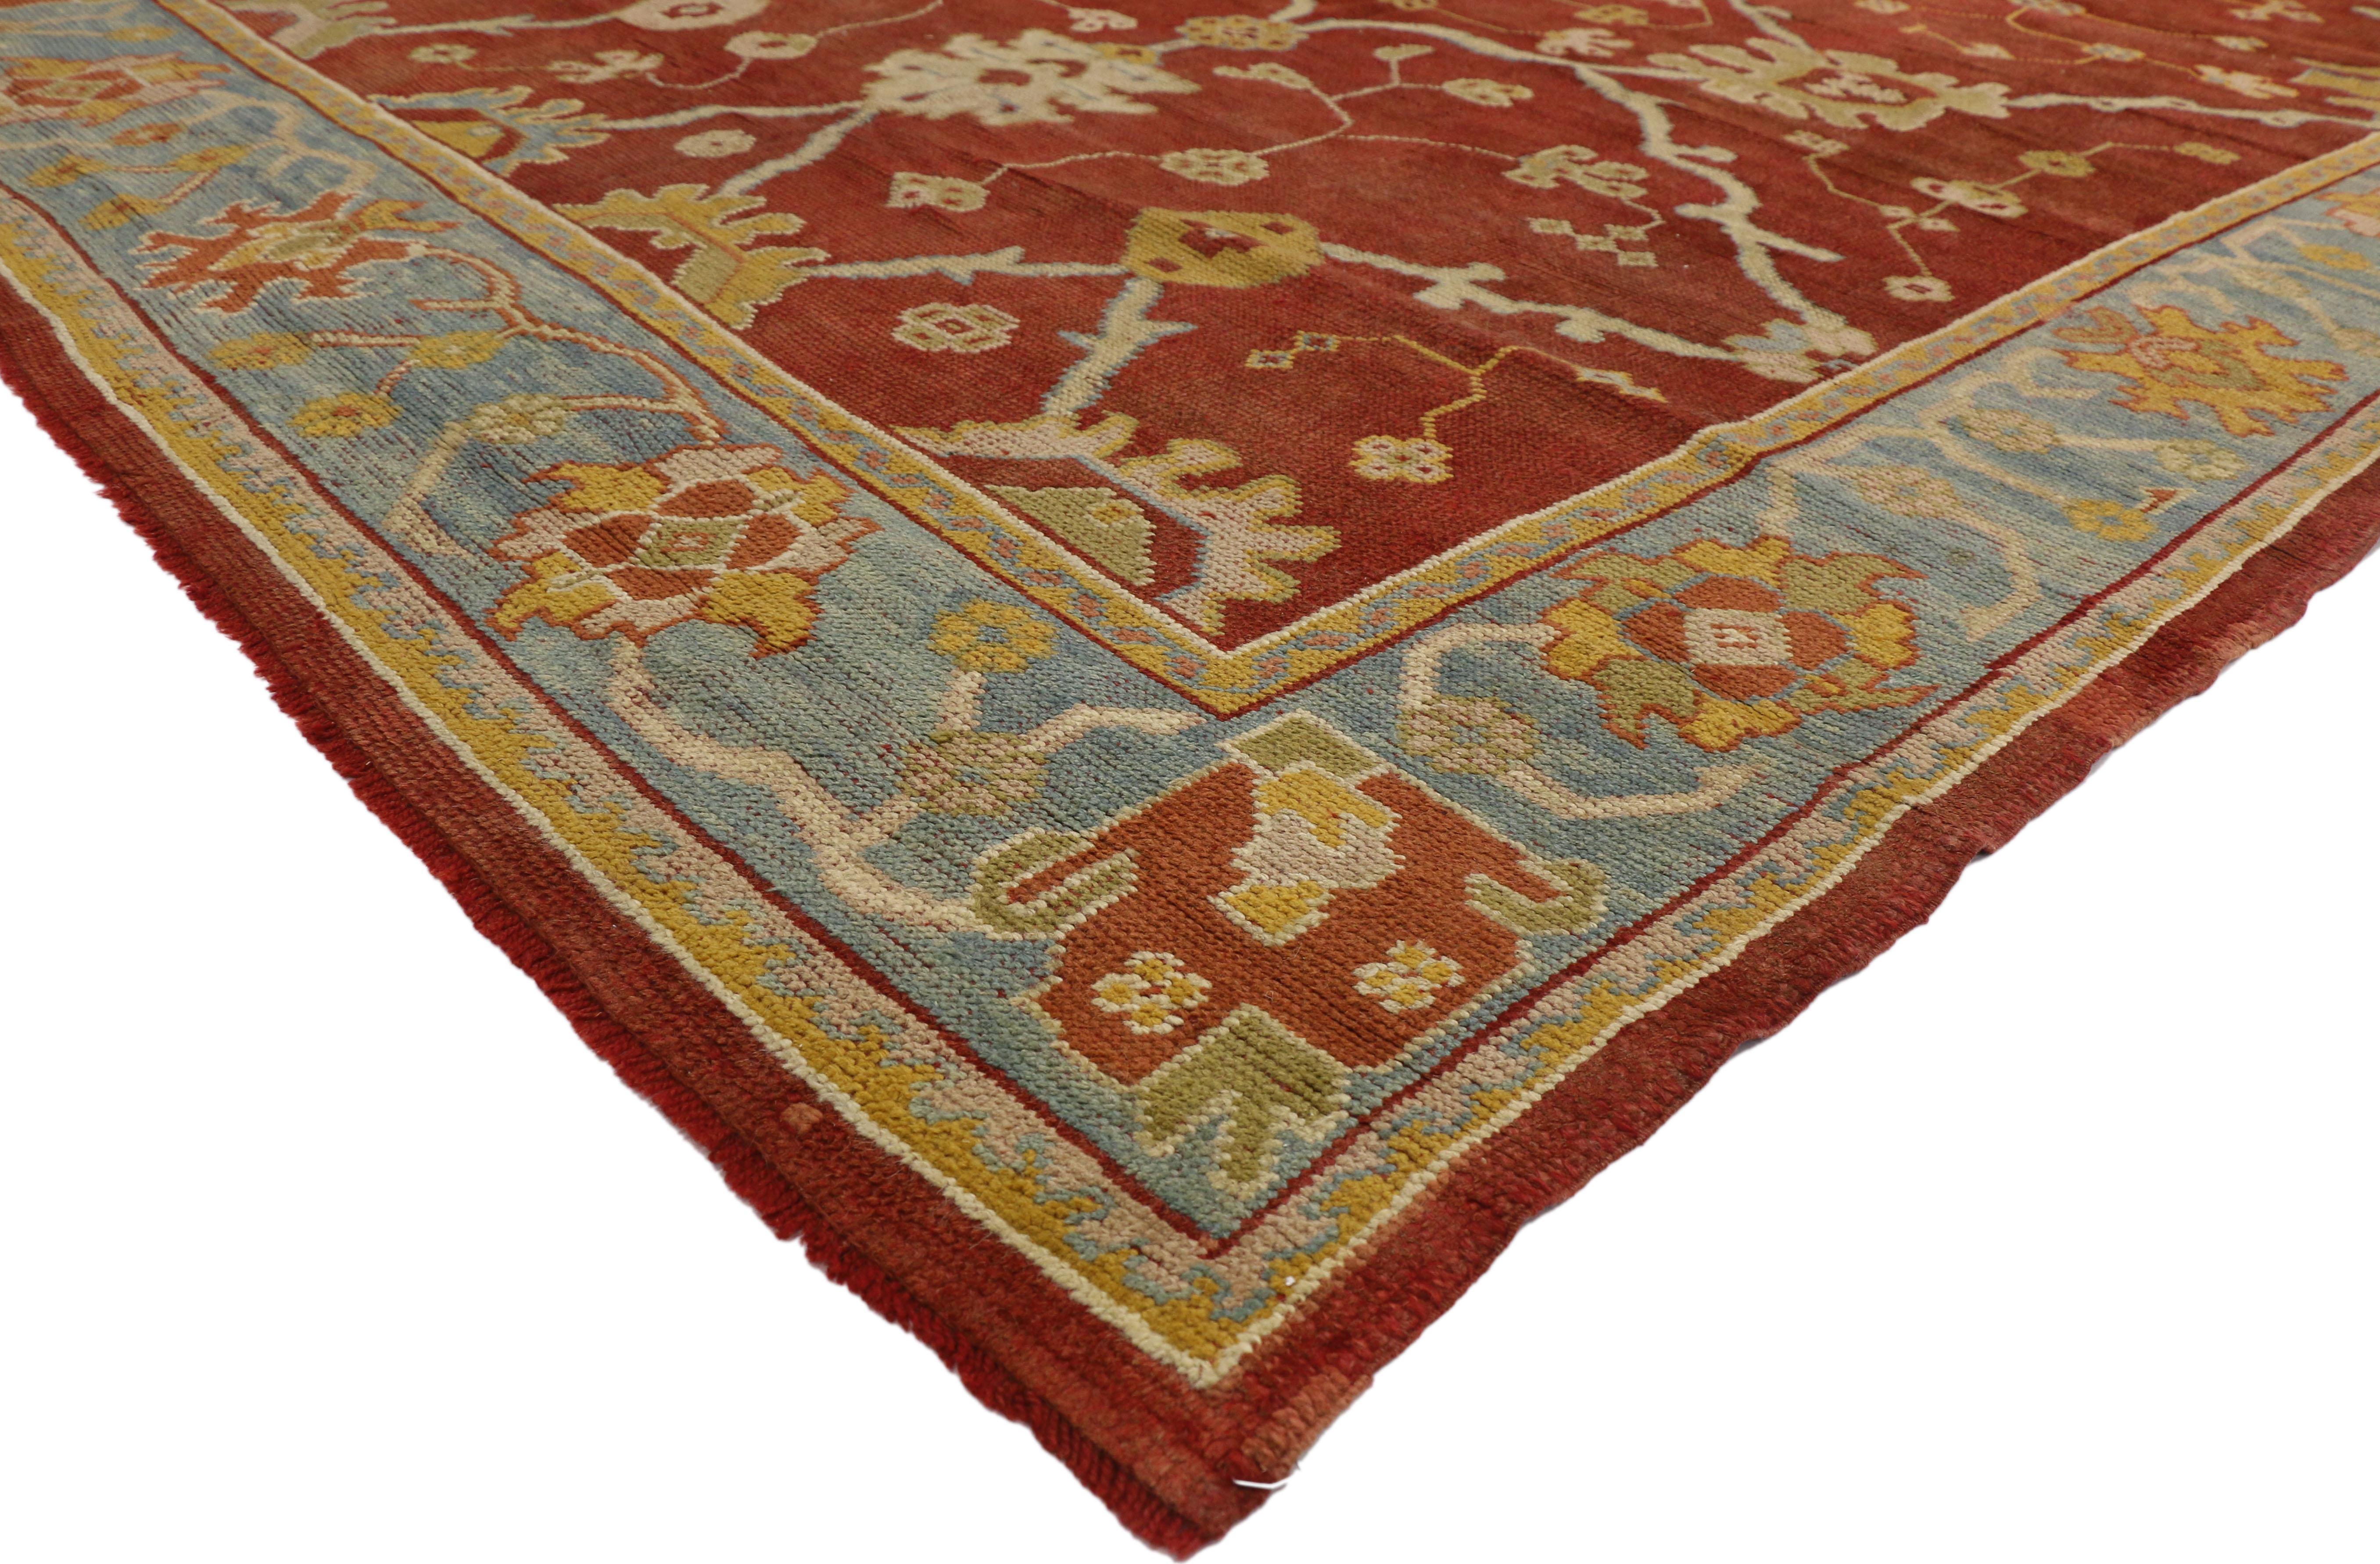 73536 Antique Turkish Oushak Long Gallery Rug with Arts and Crafts Style 07'09 x 23'05. This hand-knotted wool antique Turkish Oushak long area rug features an all-over geometric pattern composed of Harshang-style motifs, blooming palmettes, leafy